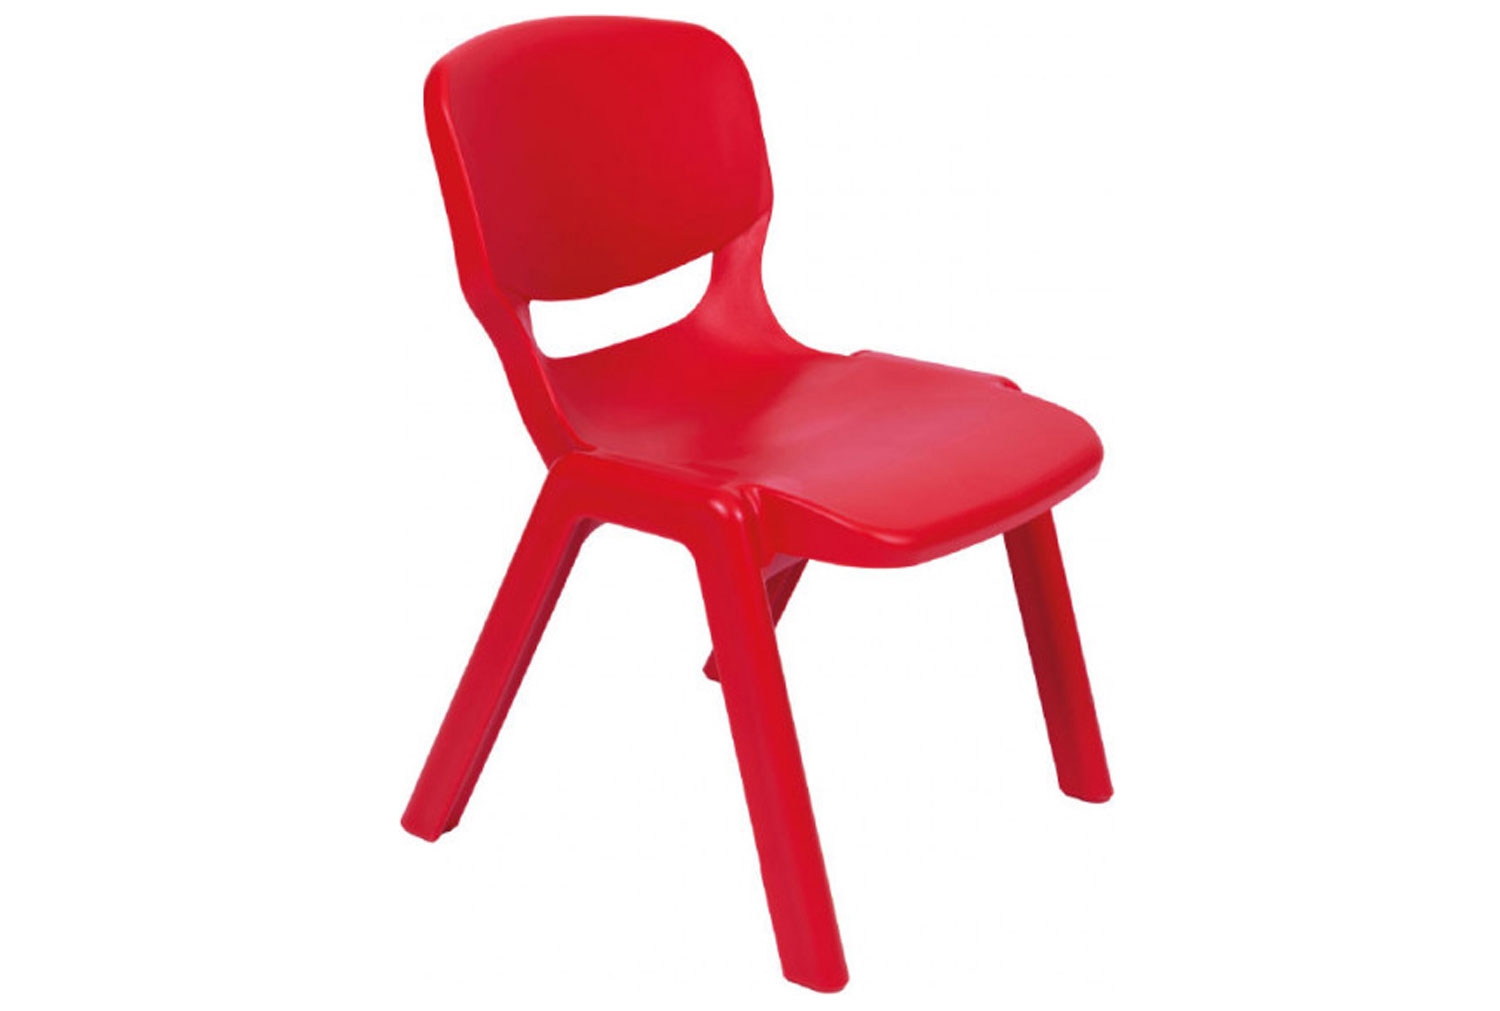 Qty 6 - Ergos Classroom Chairs, 4-6 Years - 30wx36dx31h (cm), Bright Red